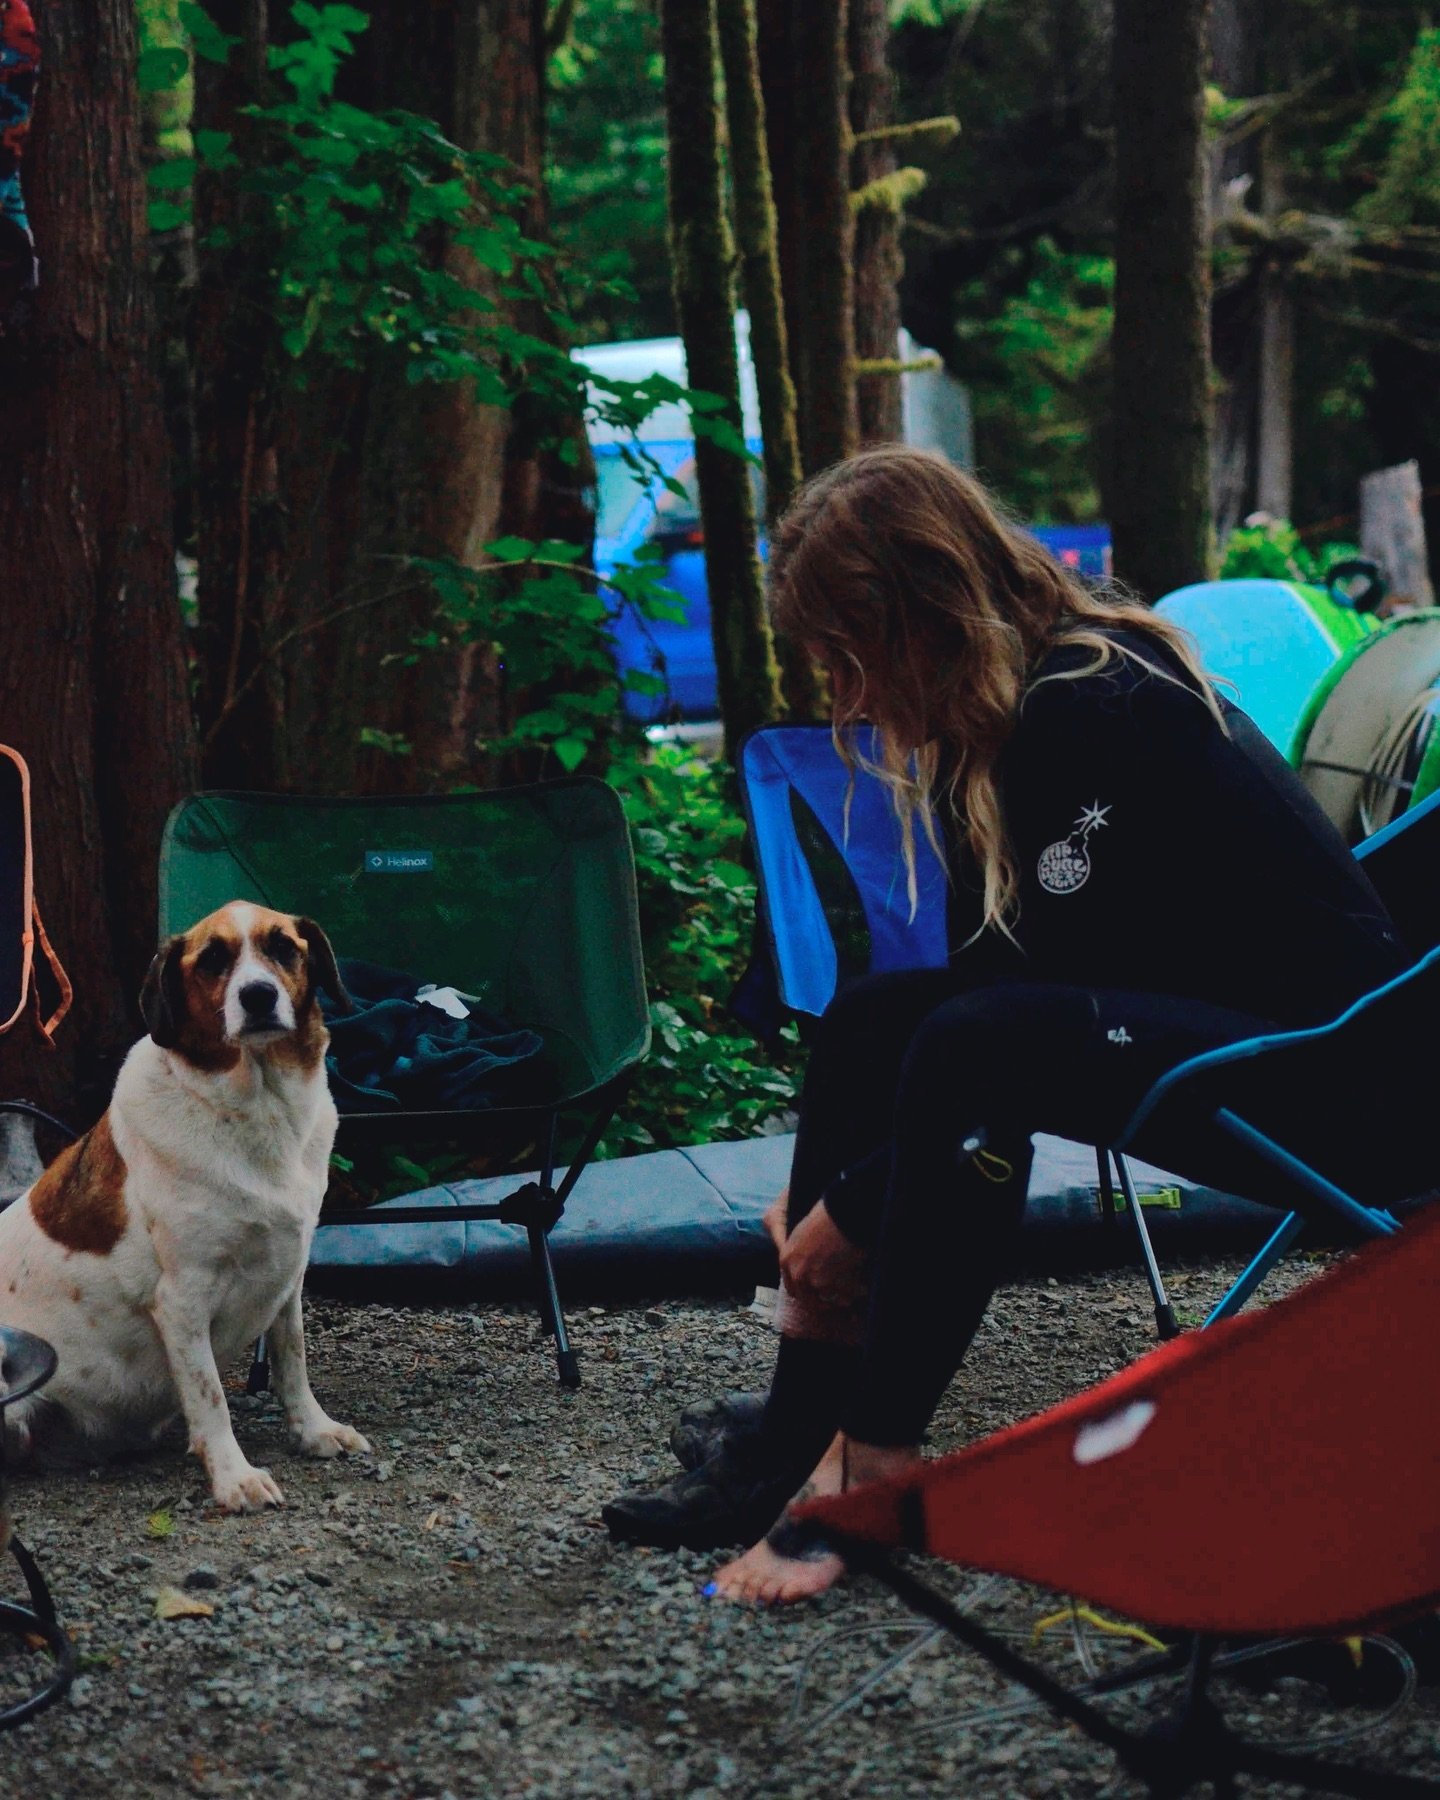 Early mornings at our favourite campground  @surfgrove 

Photo by @aeparry 

.
.
.
.
.
.
#bitchesnbarrels #womeninwetsuits #surfgrove #yourtofino #womensurfretreat #surfretreatforwomen #tofino #womenwhosurf